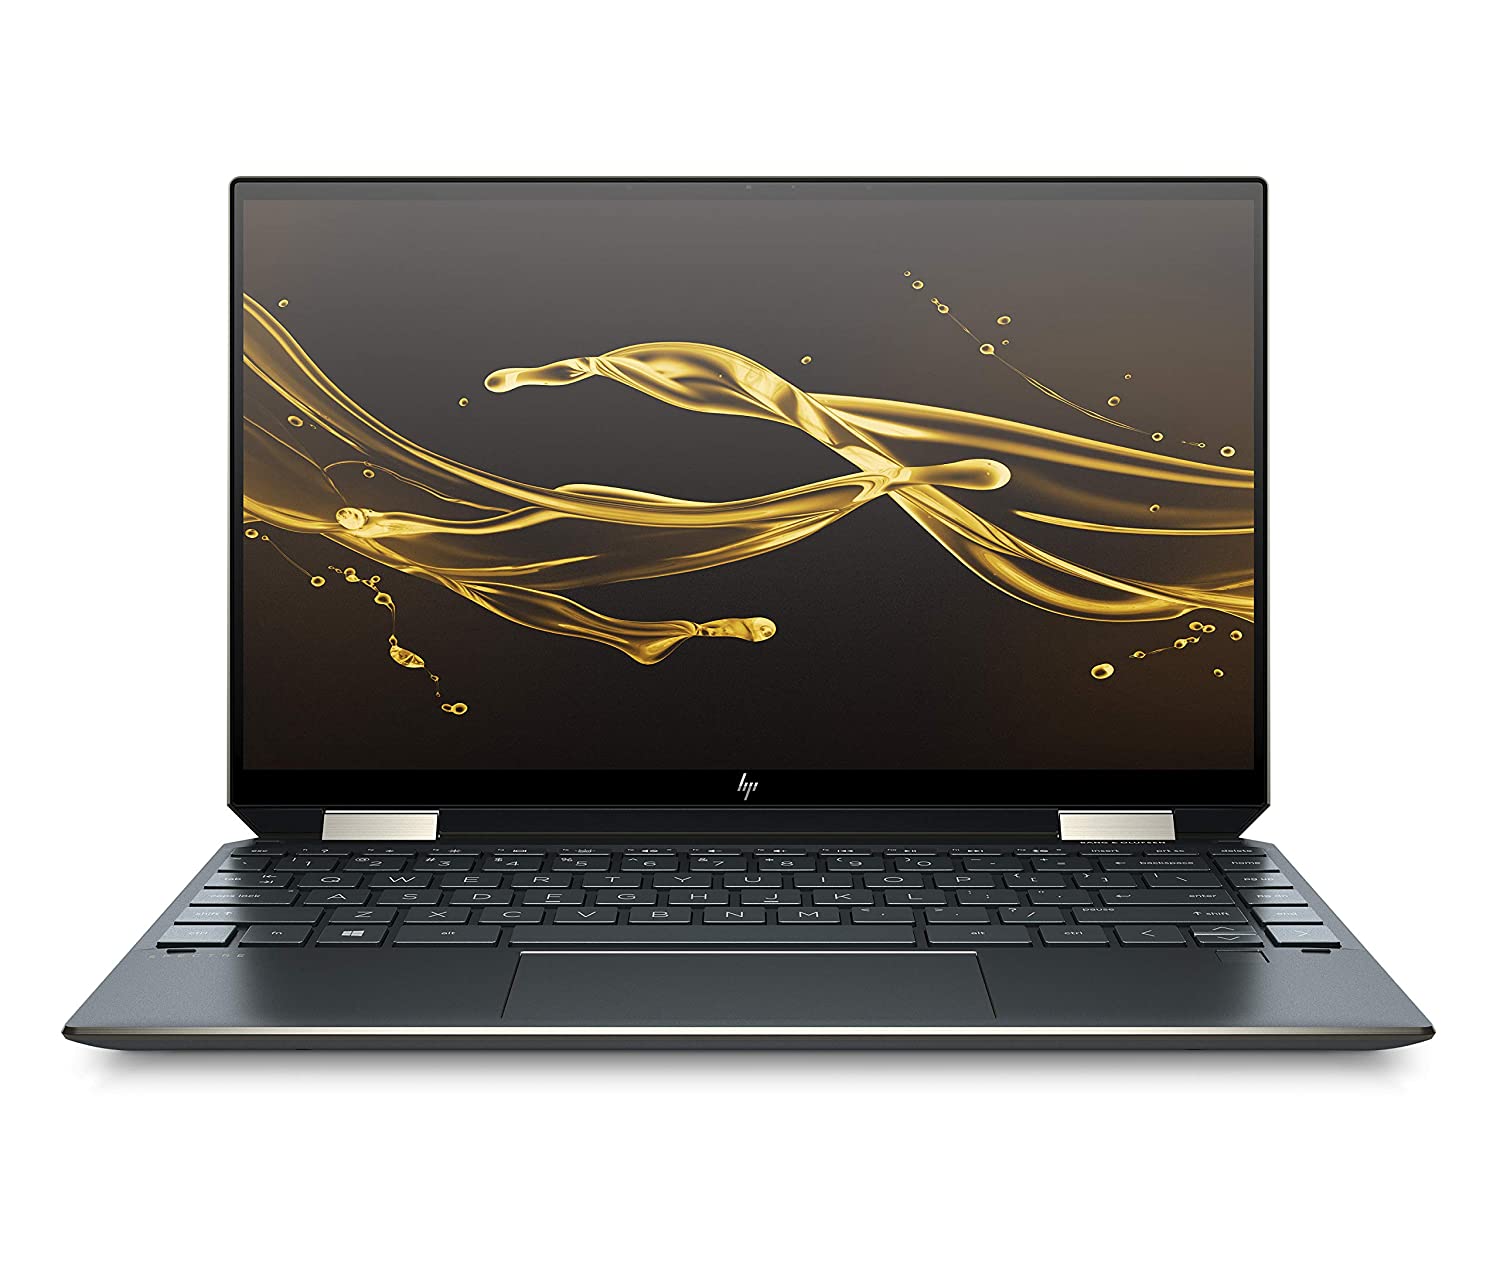 Amazon.in: Buy HP New Spectre X360 13-aw0205tu 13.3-inch Laptop (10th Gen  i7-1065G7/16GB/512GB SSD/Windows 10 Pro/Intel Iris Plus Graphics), Night  Fall Black Online at Low Prices in India | HP Reviews & Ratings